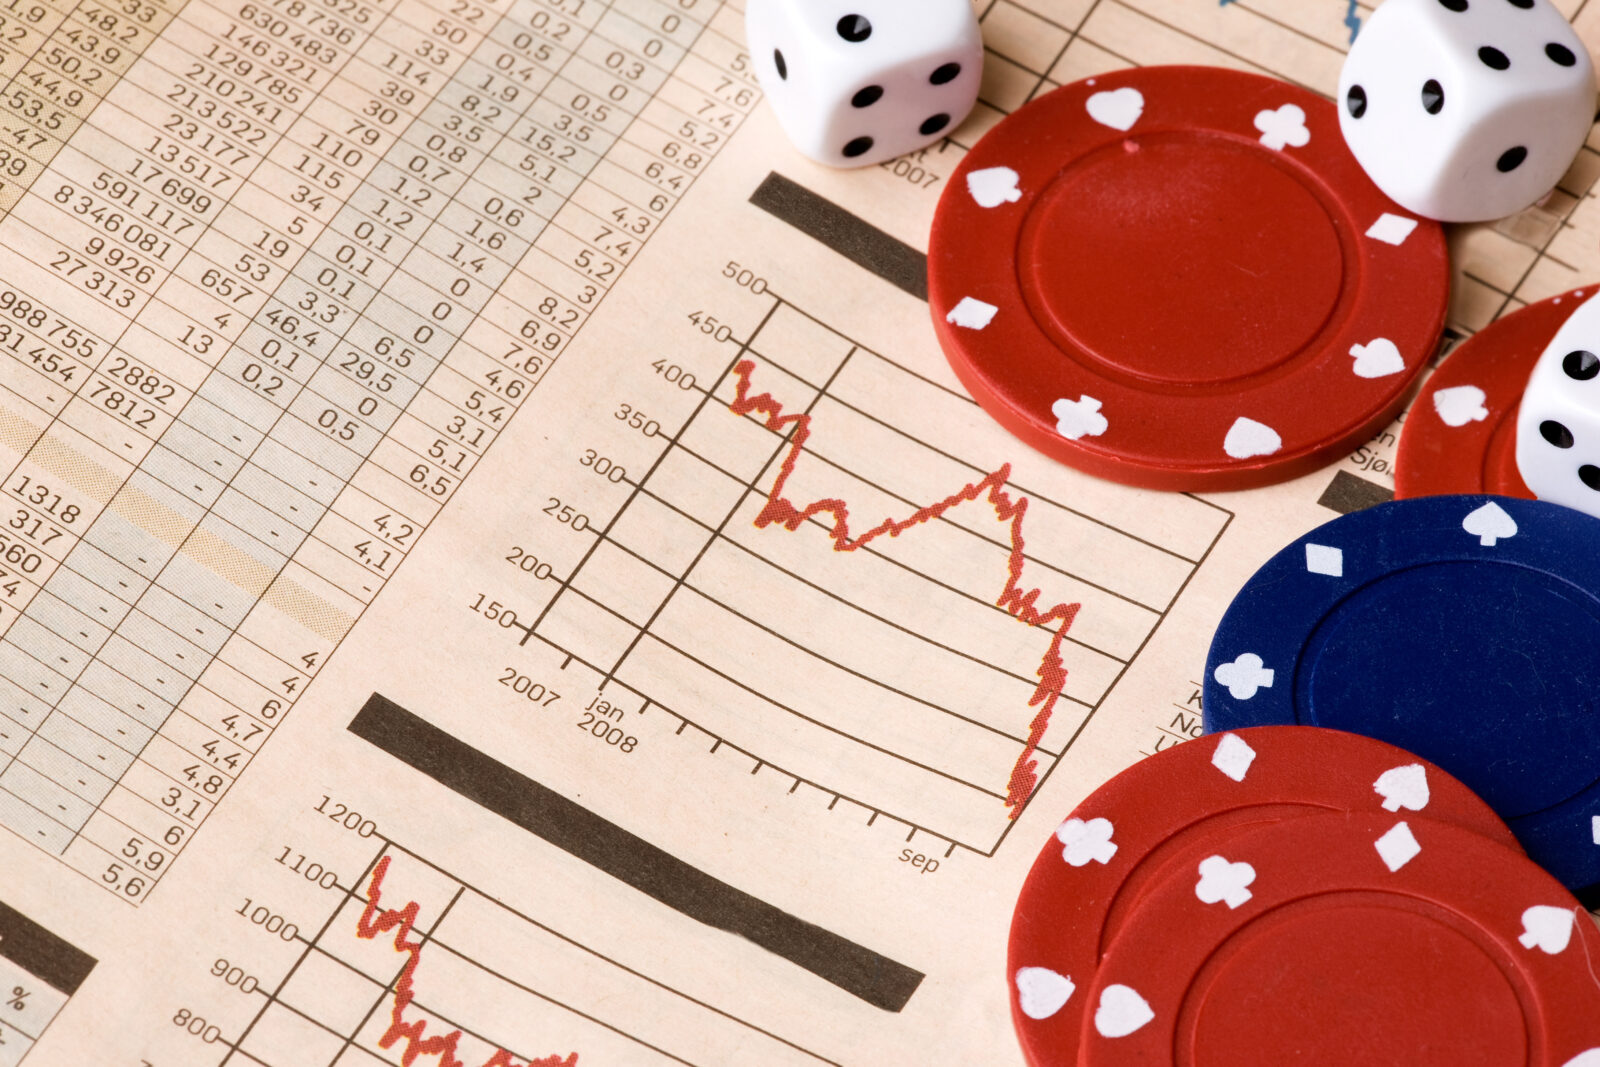 dice and casino chips on a stock market chart